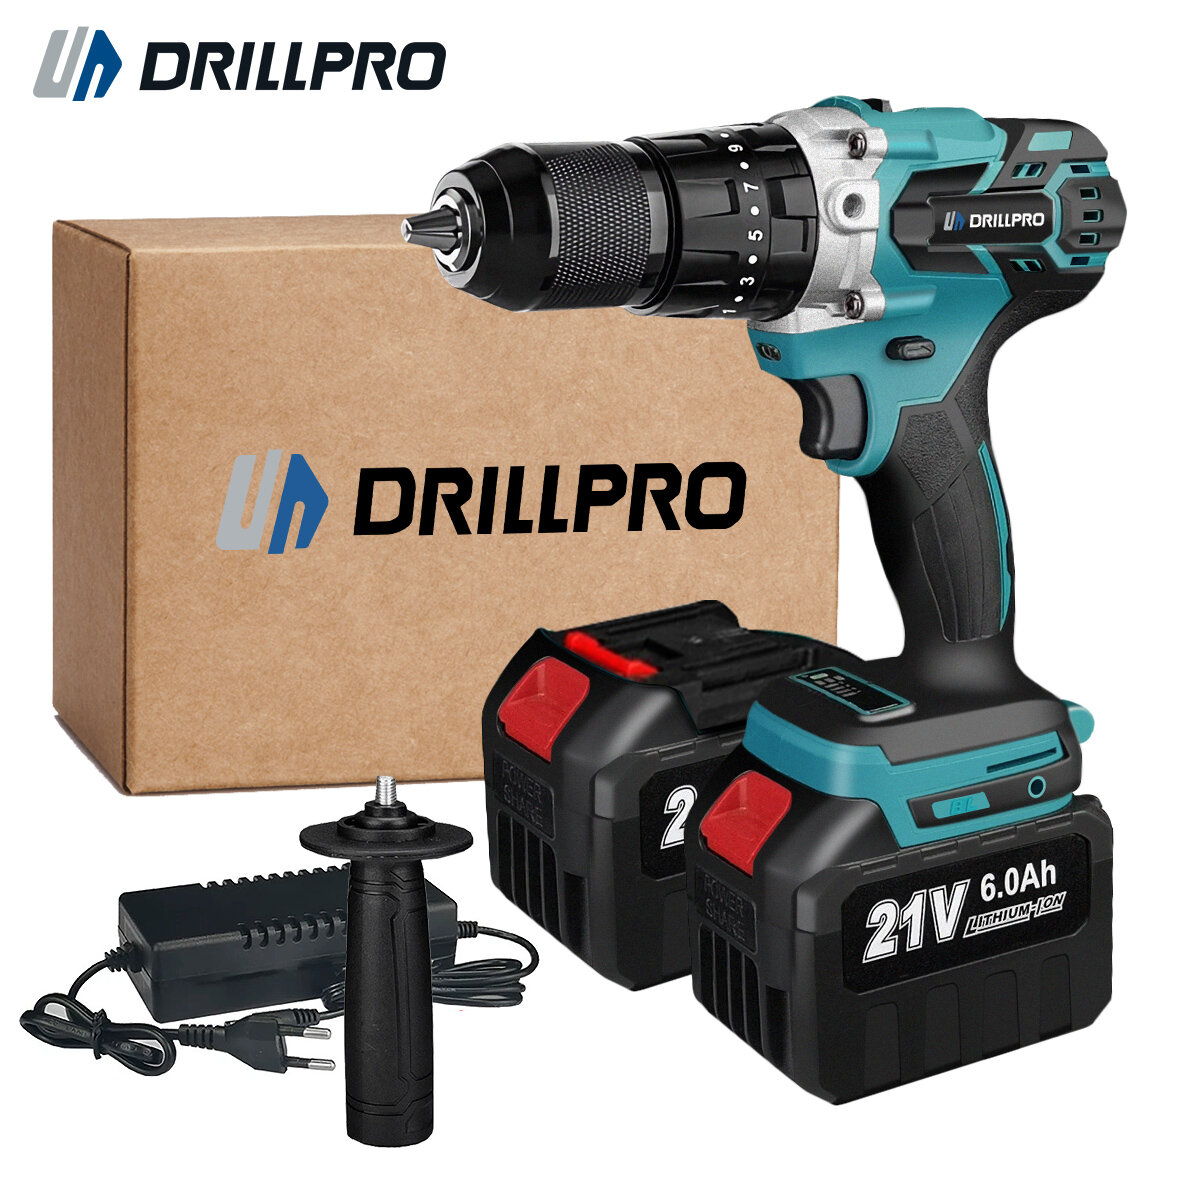 

Drillpro 21V High Torque Brushless Electric Drill with 1/2" Keyless Chuck LED Light 3-in-1 Functions 0-1800rpm Speed Inc